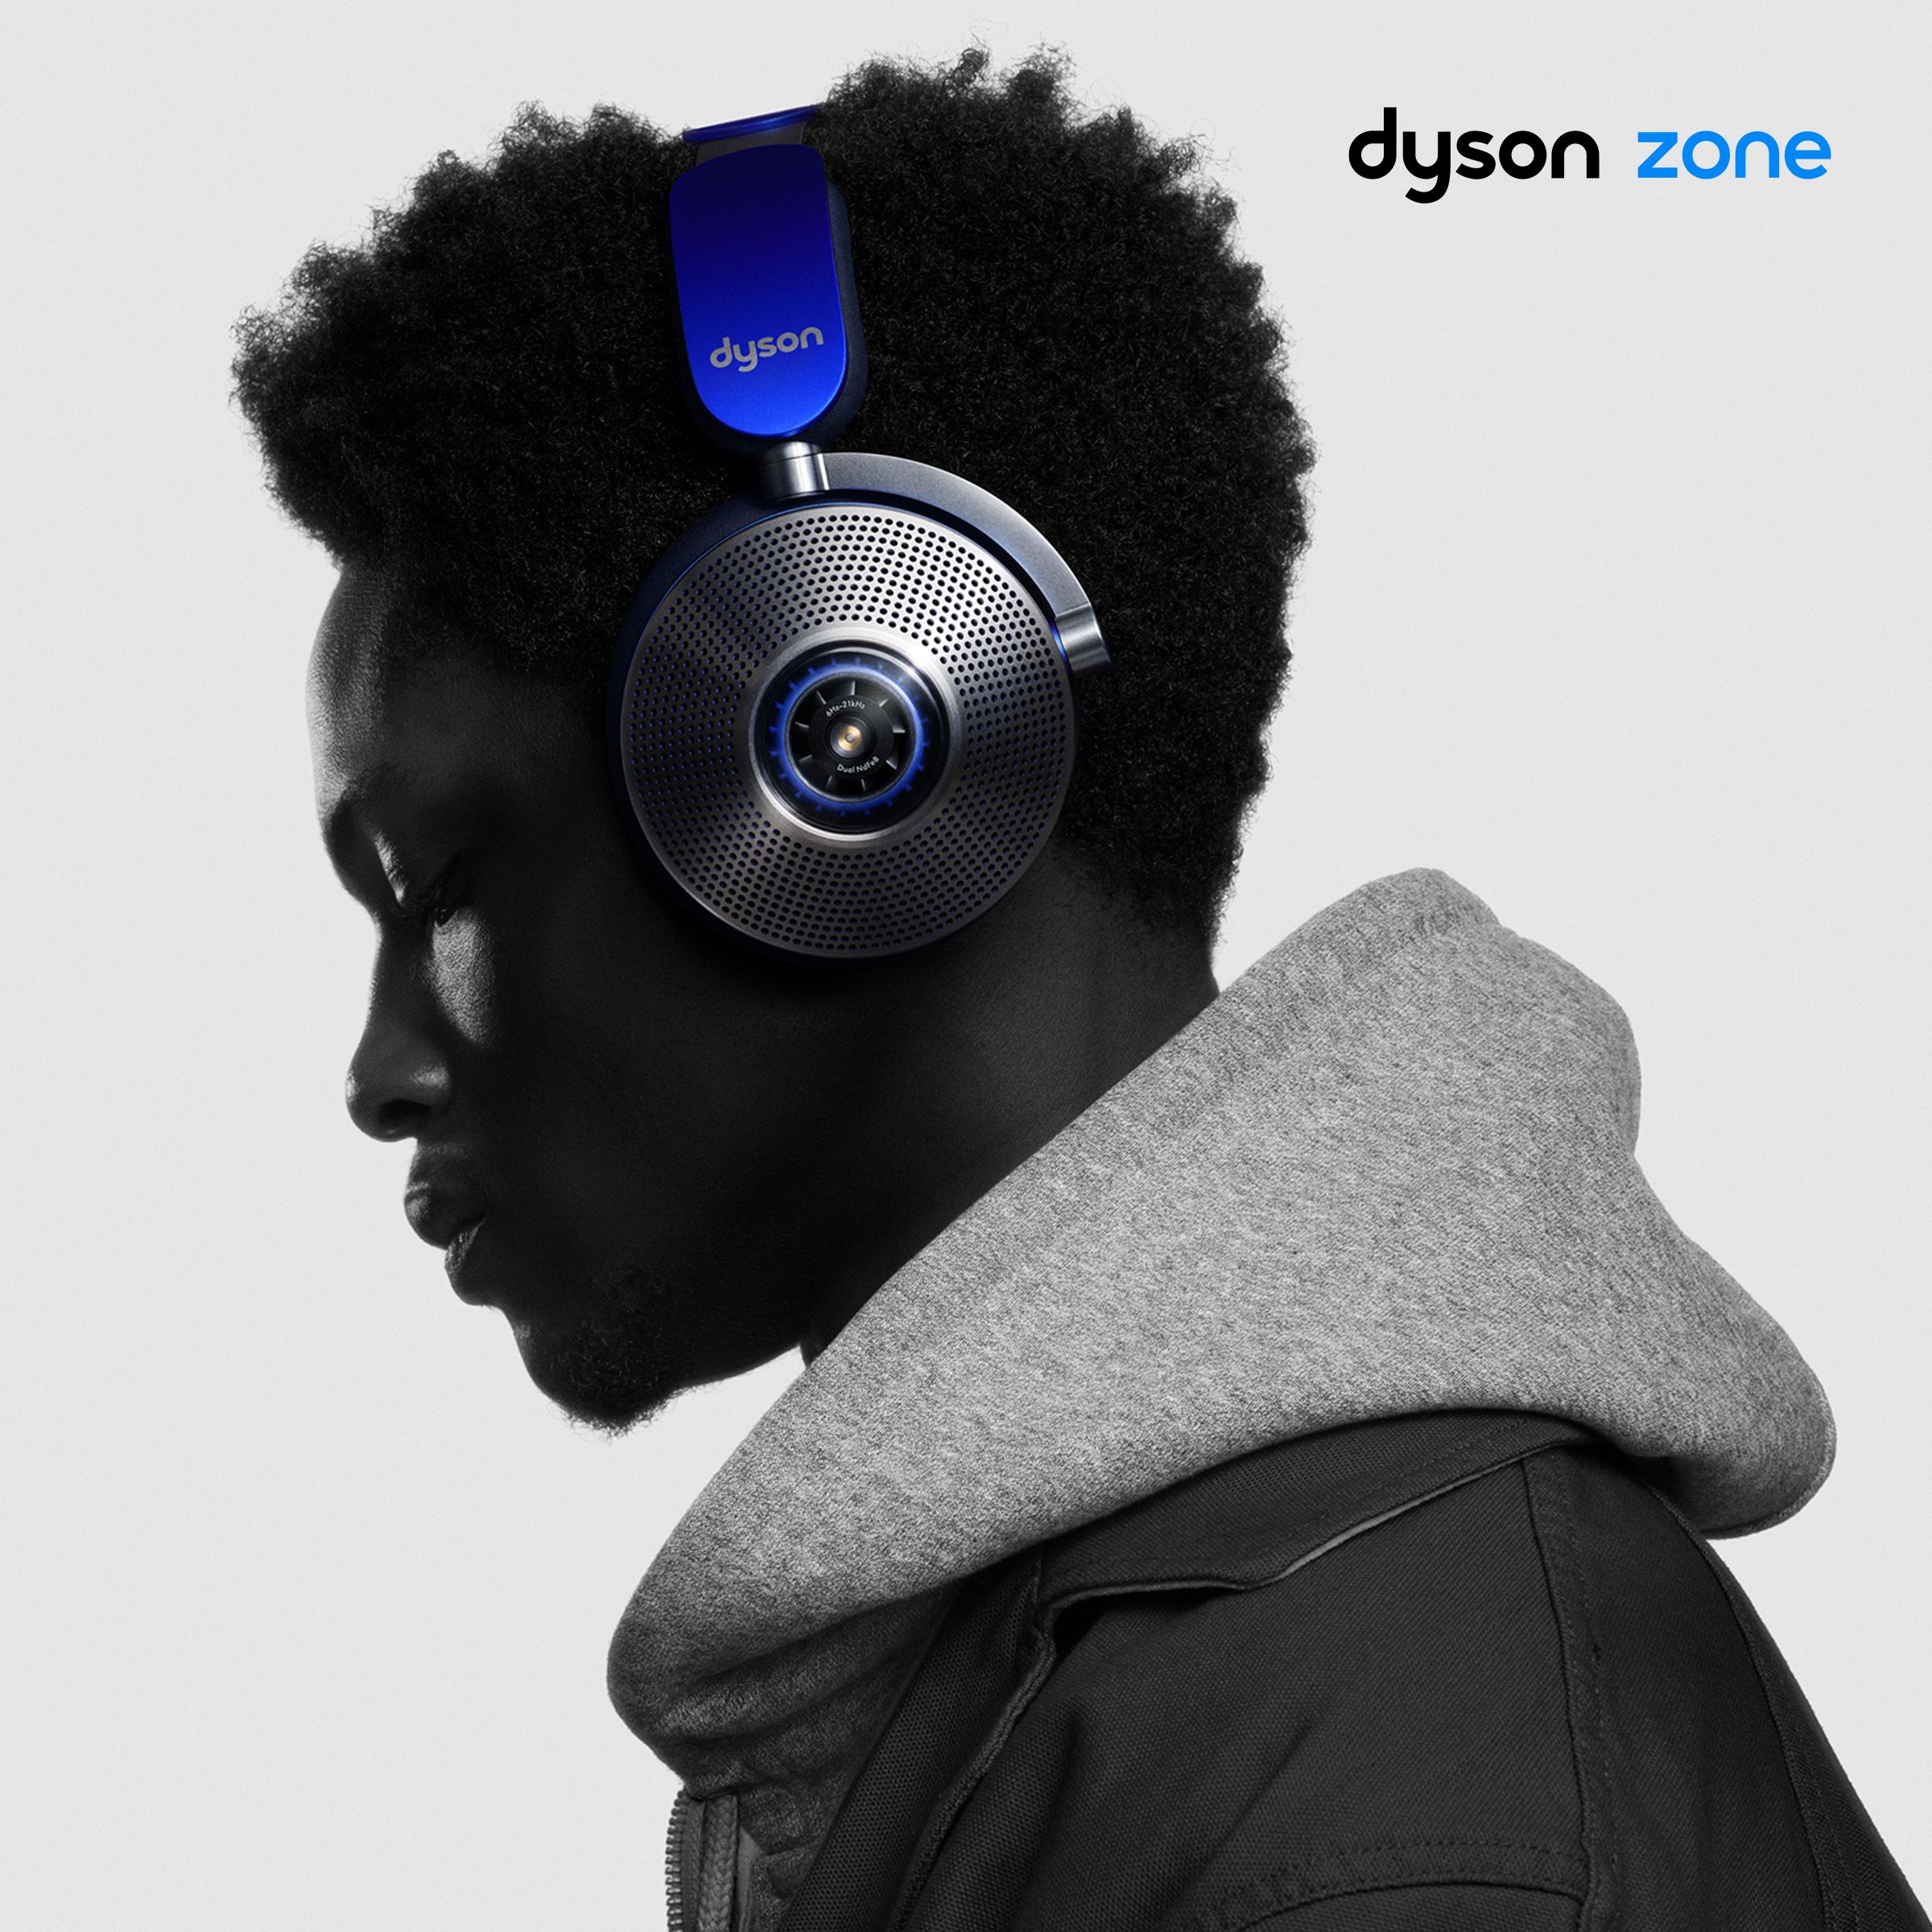 Pure audio. Industry-leading noise cancellation.